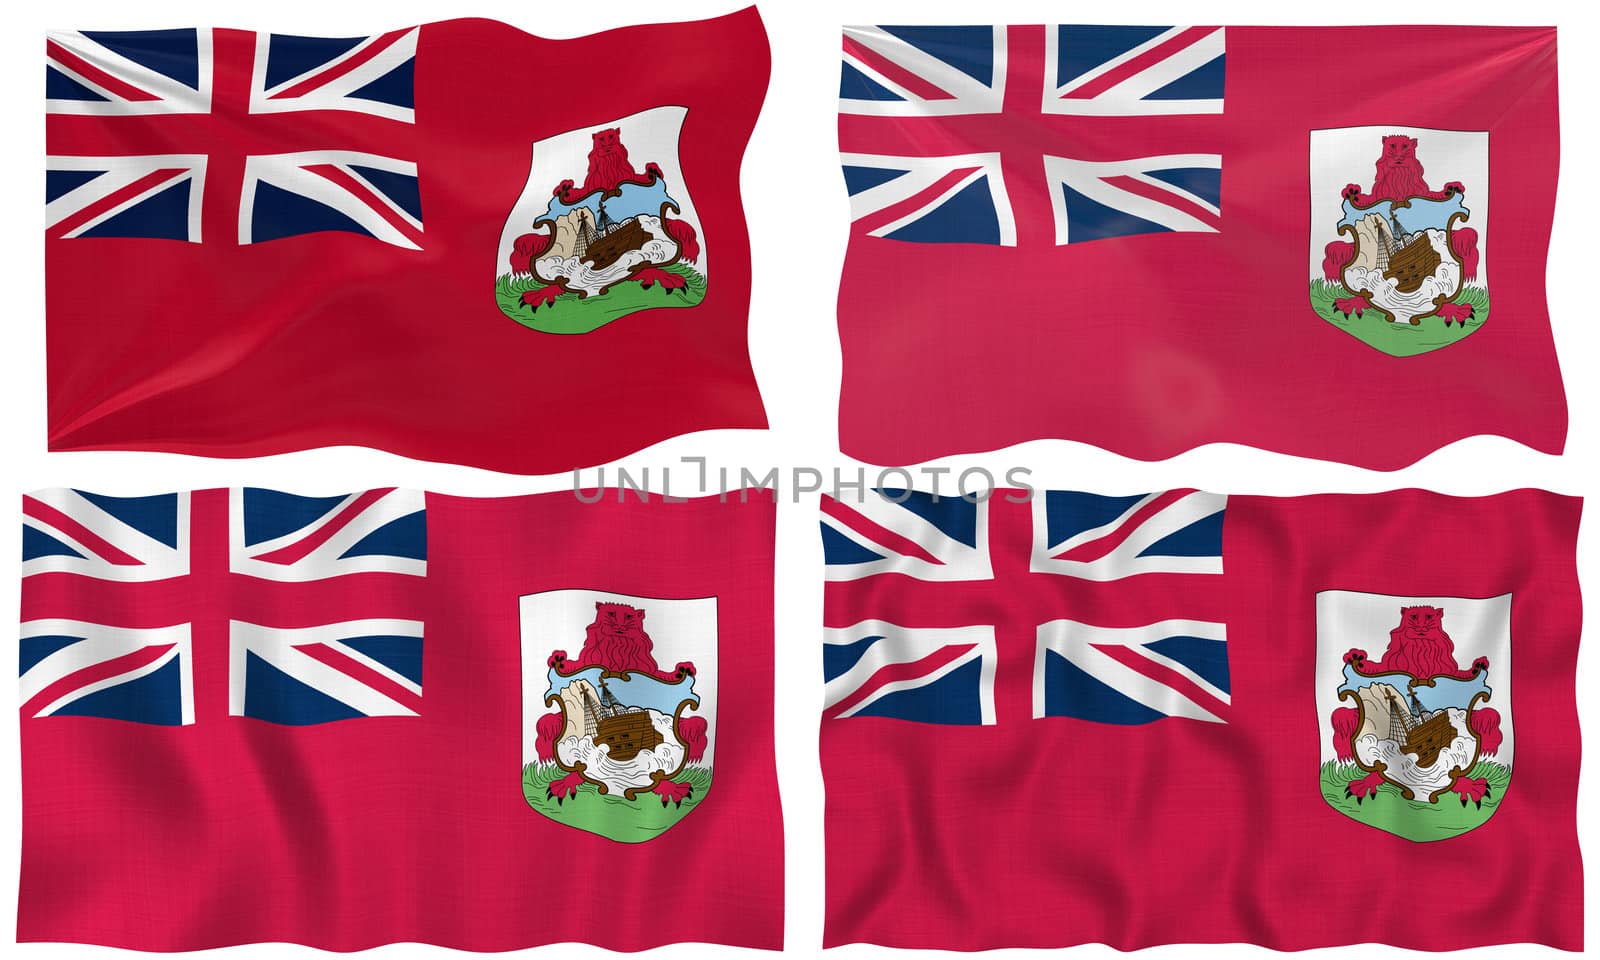 Great Image of the Flag of Bermuda